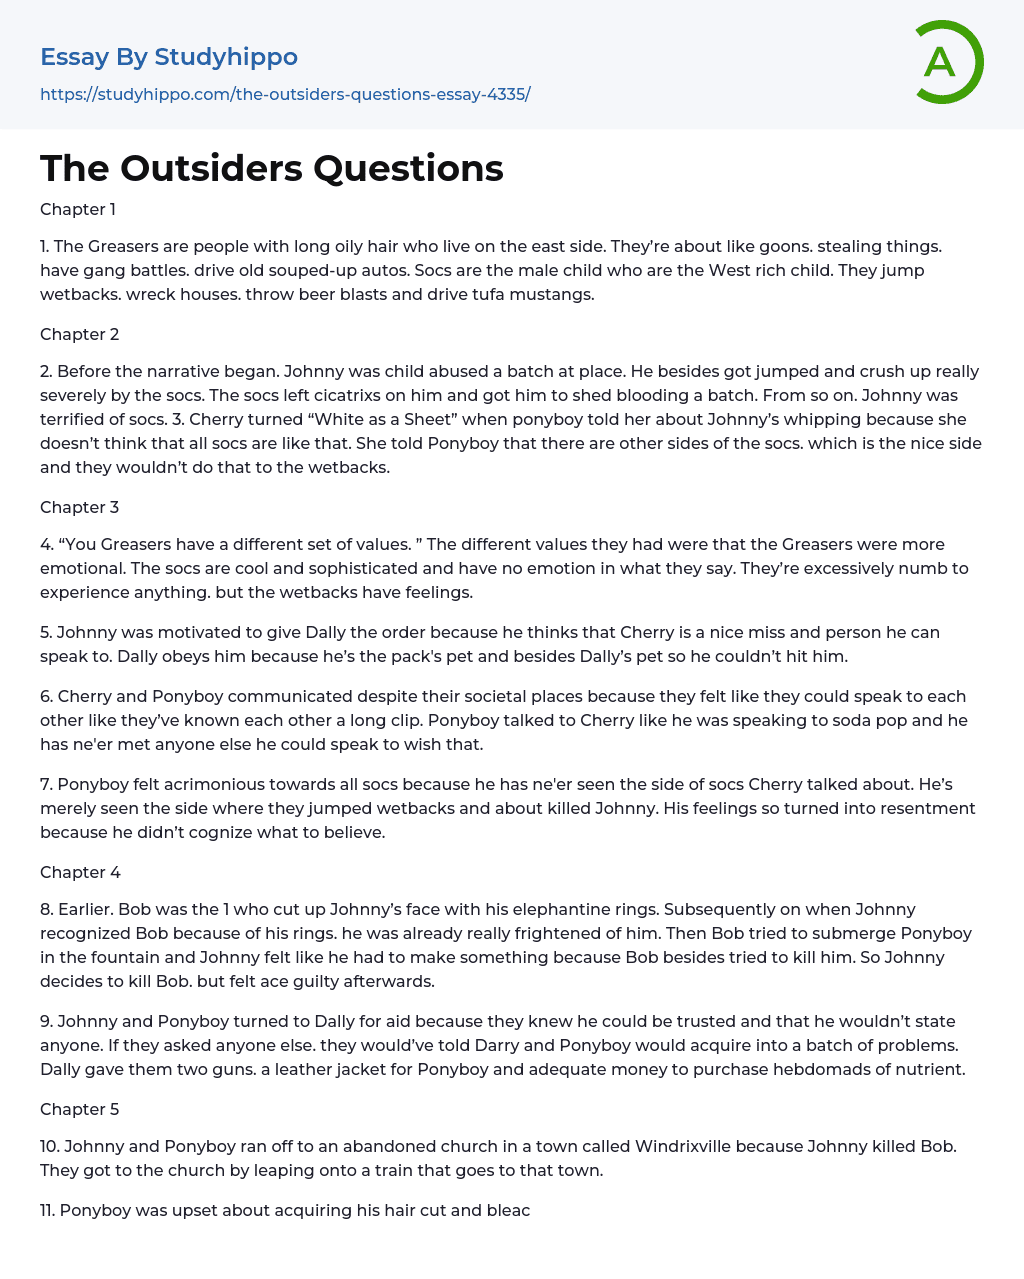 The Outsiders Questions Essay Example